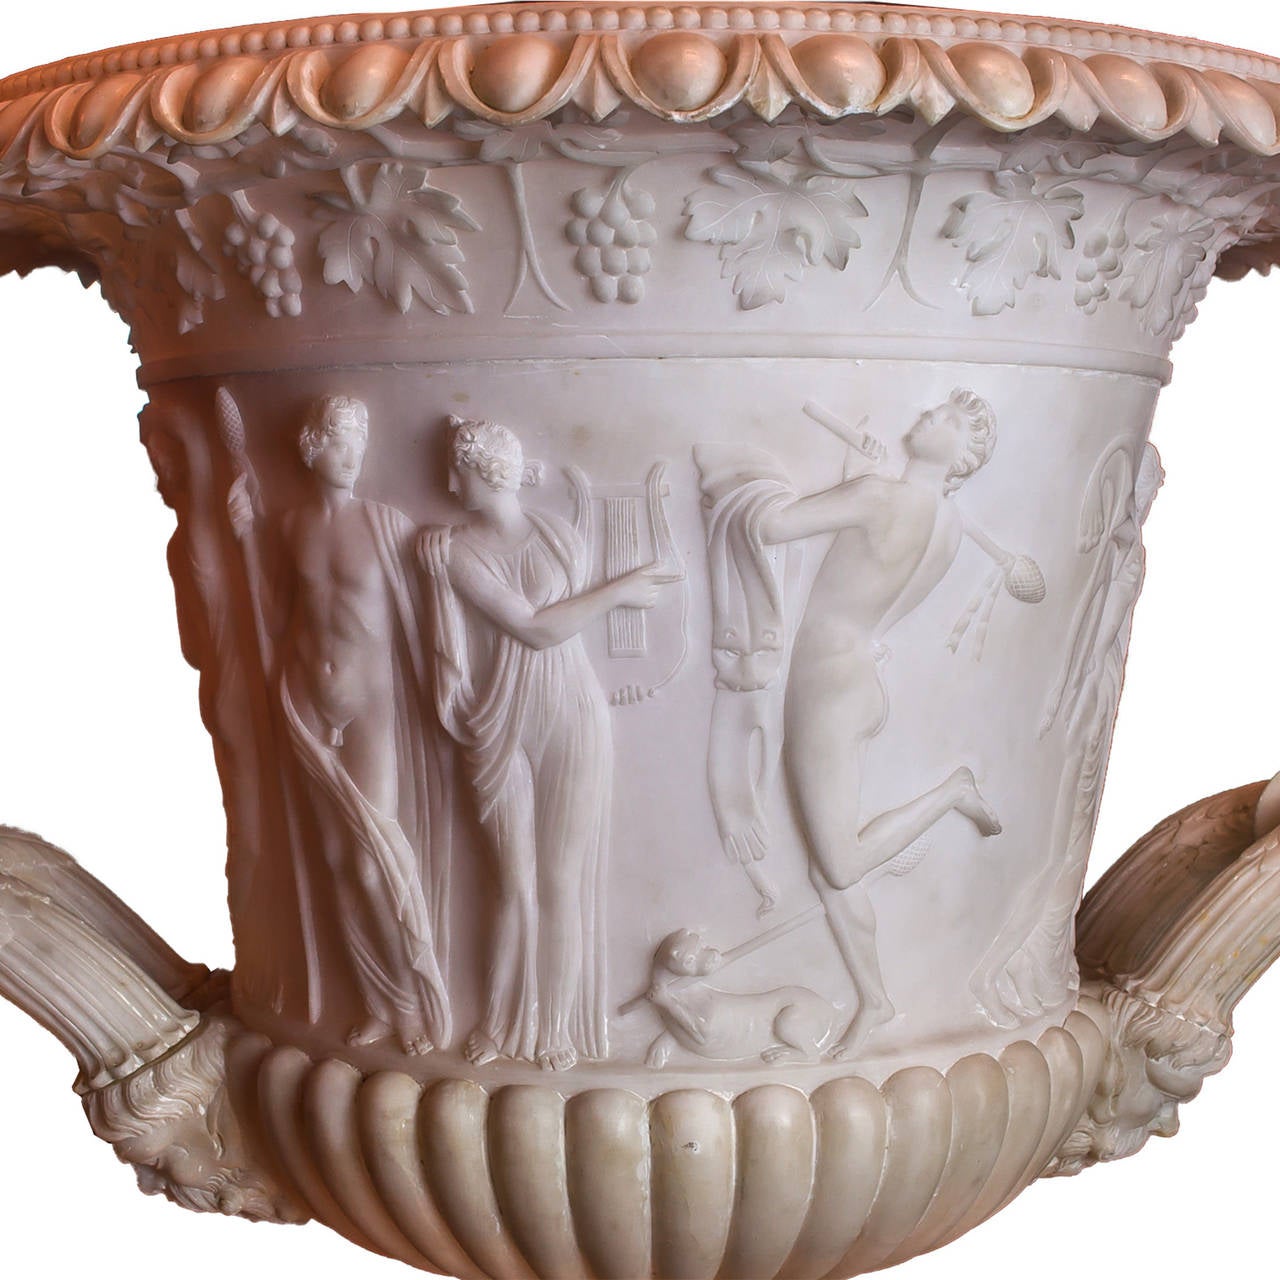 Magnificent Pair of Campana Form Alabaster Neoclassical Vases with Figures 1